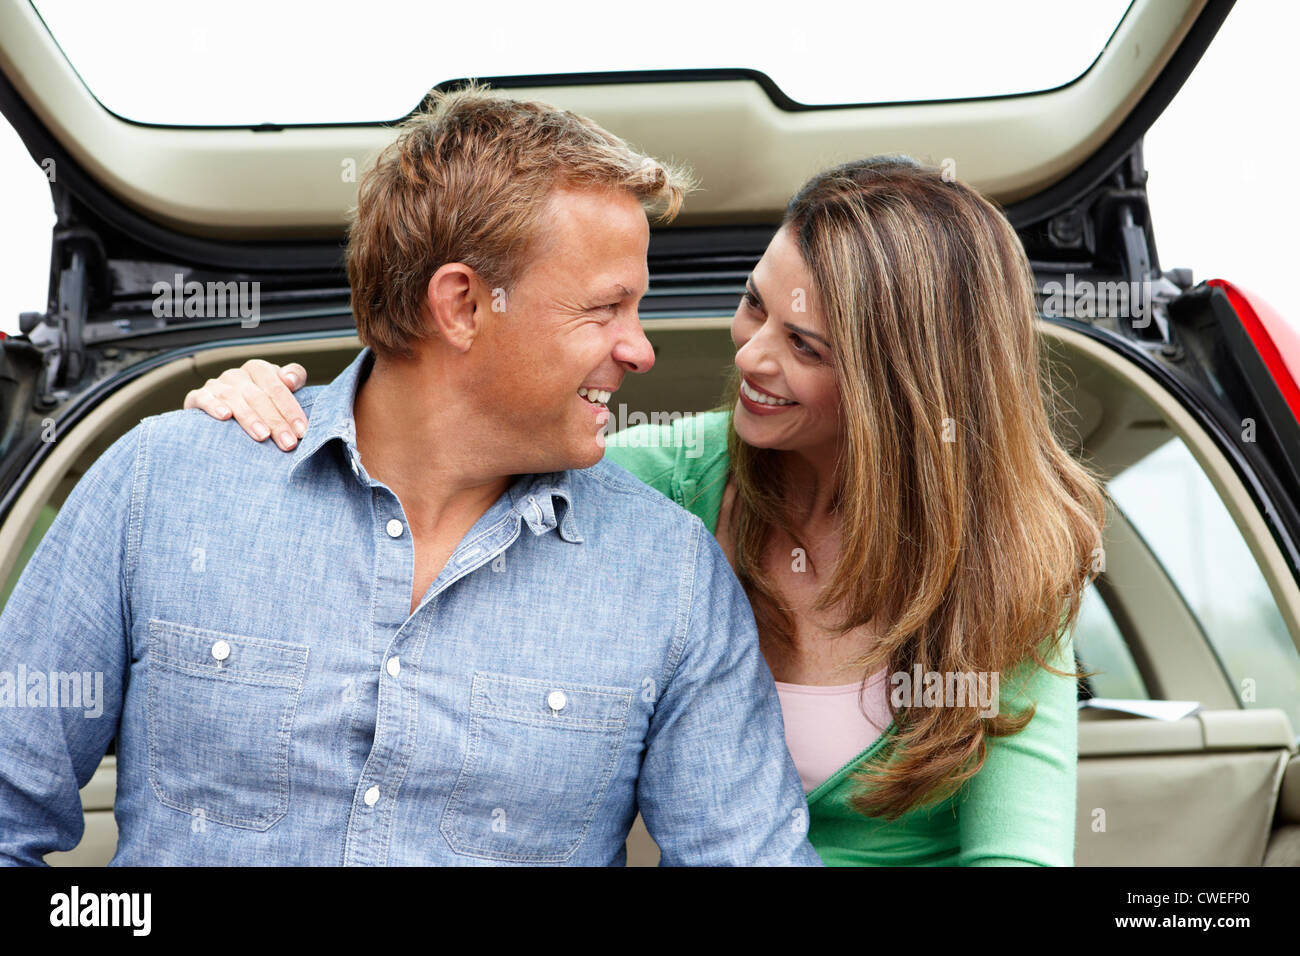 Couple outdoors with car Stock Photo